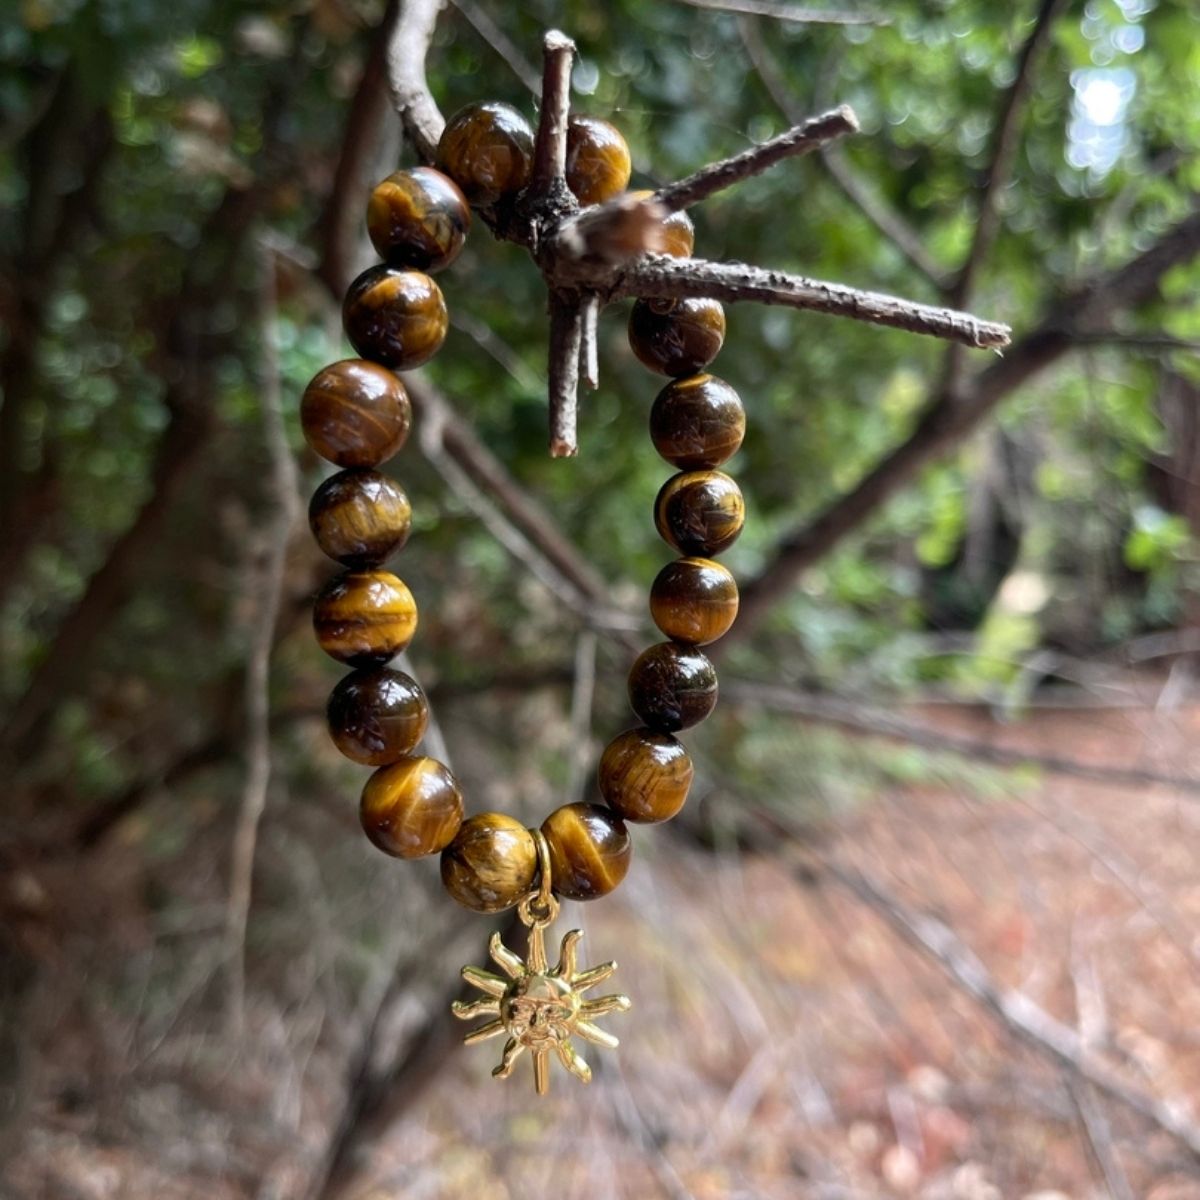 Tiger Eye Bracelet with Sunshine to Remind You of the Bright Side of Things. Tiger Eye Yoga Inspired Grounding Bracelet. A bracelet made with a very strong healing stone. Promotes balance and strength to get through difficult phases of life.